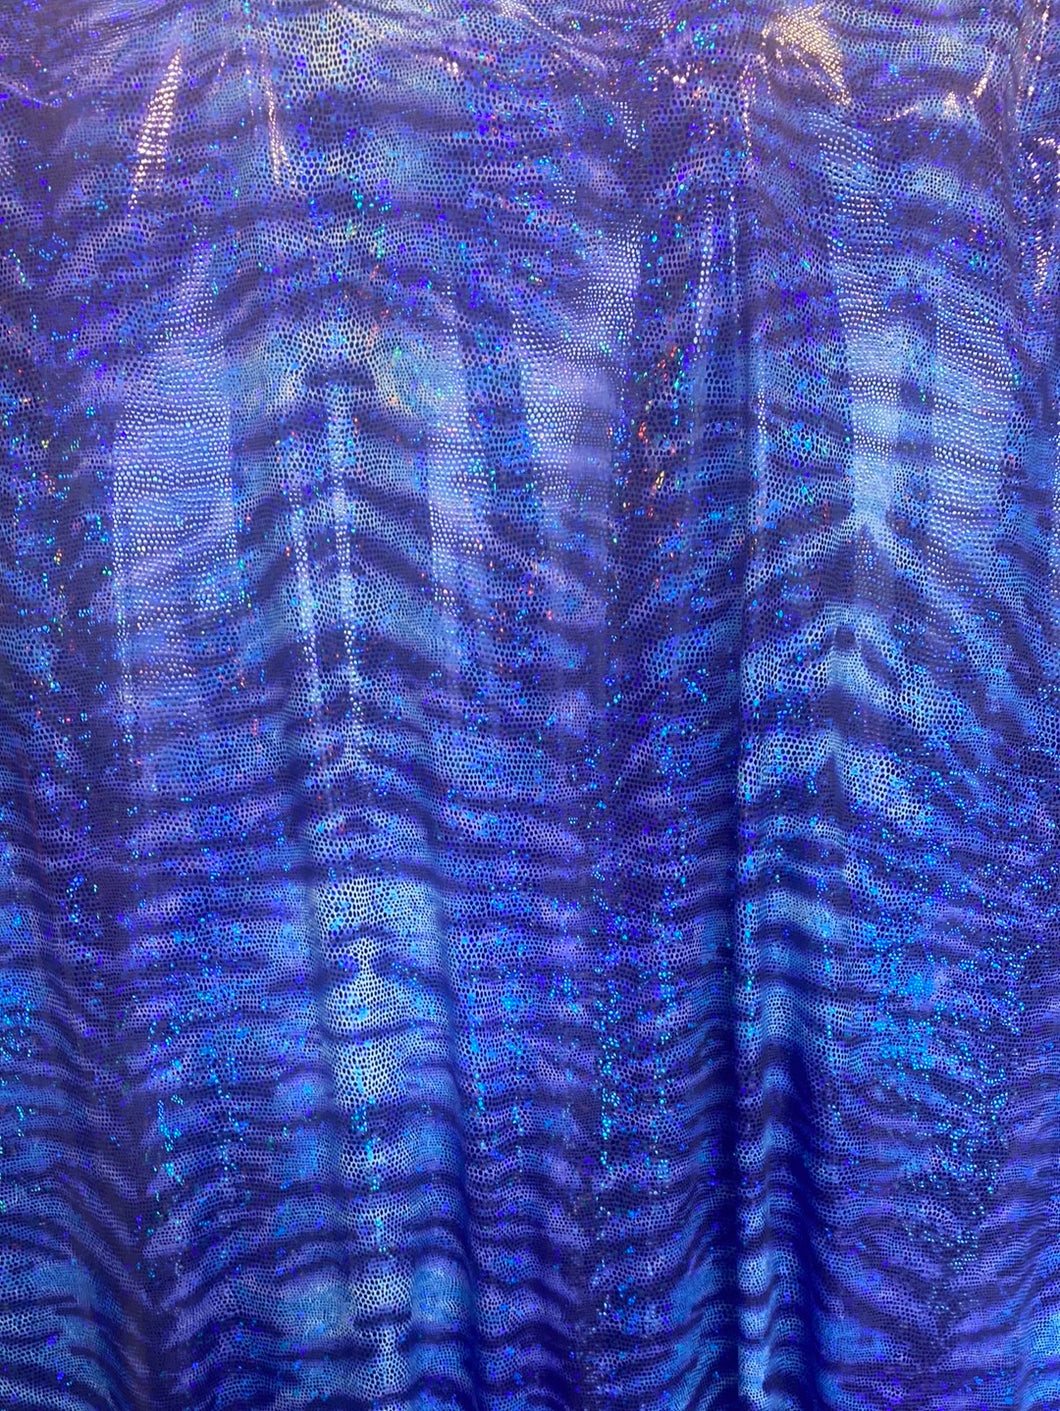 iridescent Hologram roya blue tiger design spandex stretch for all 4 sides 58/60 wide sold by the yard